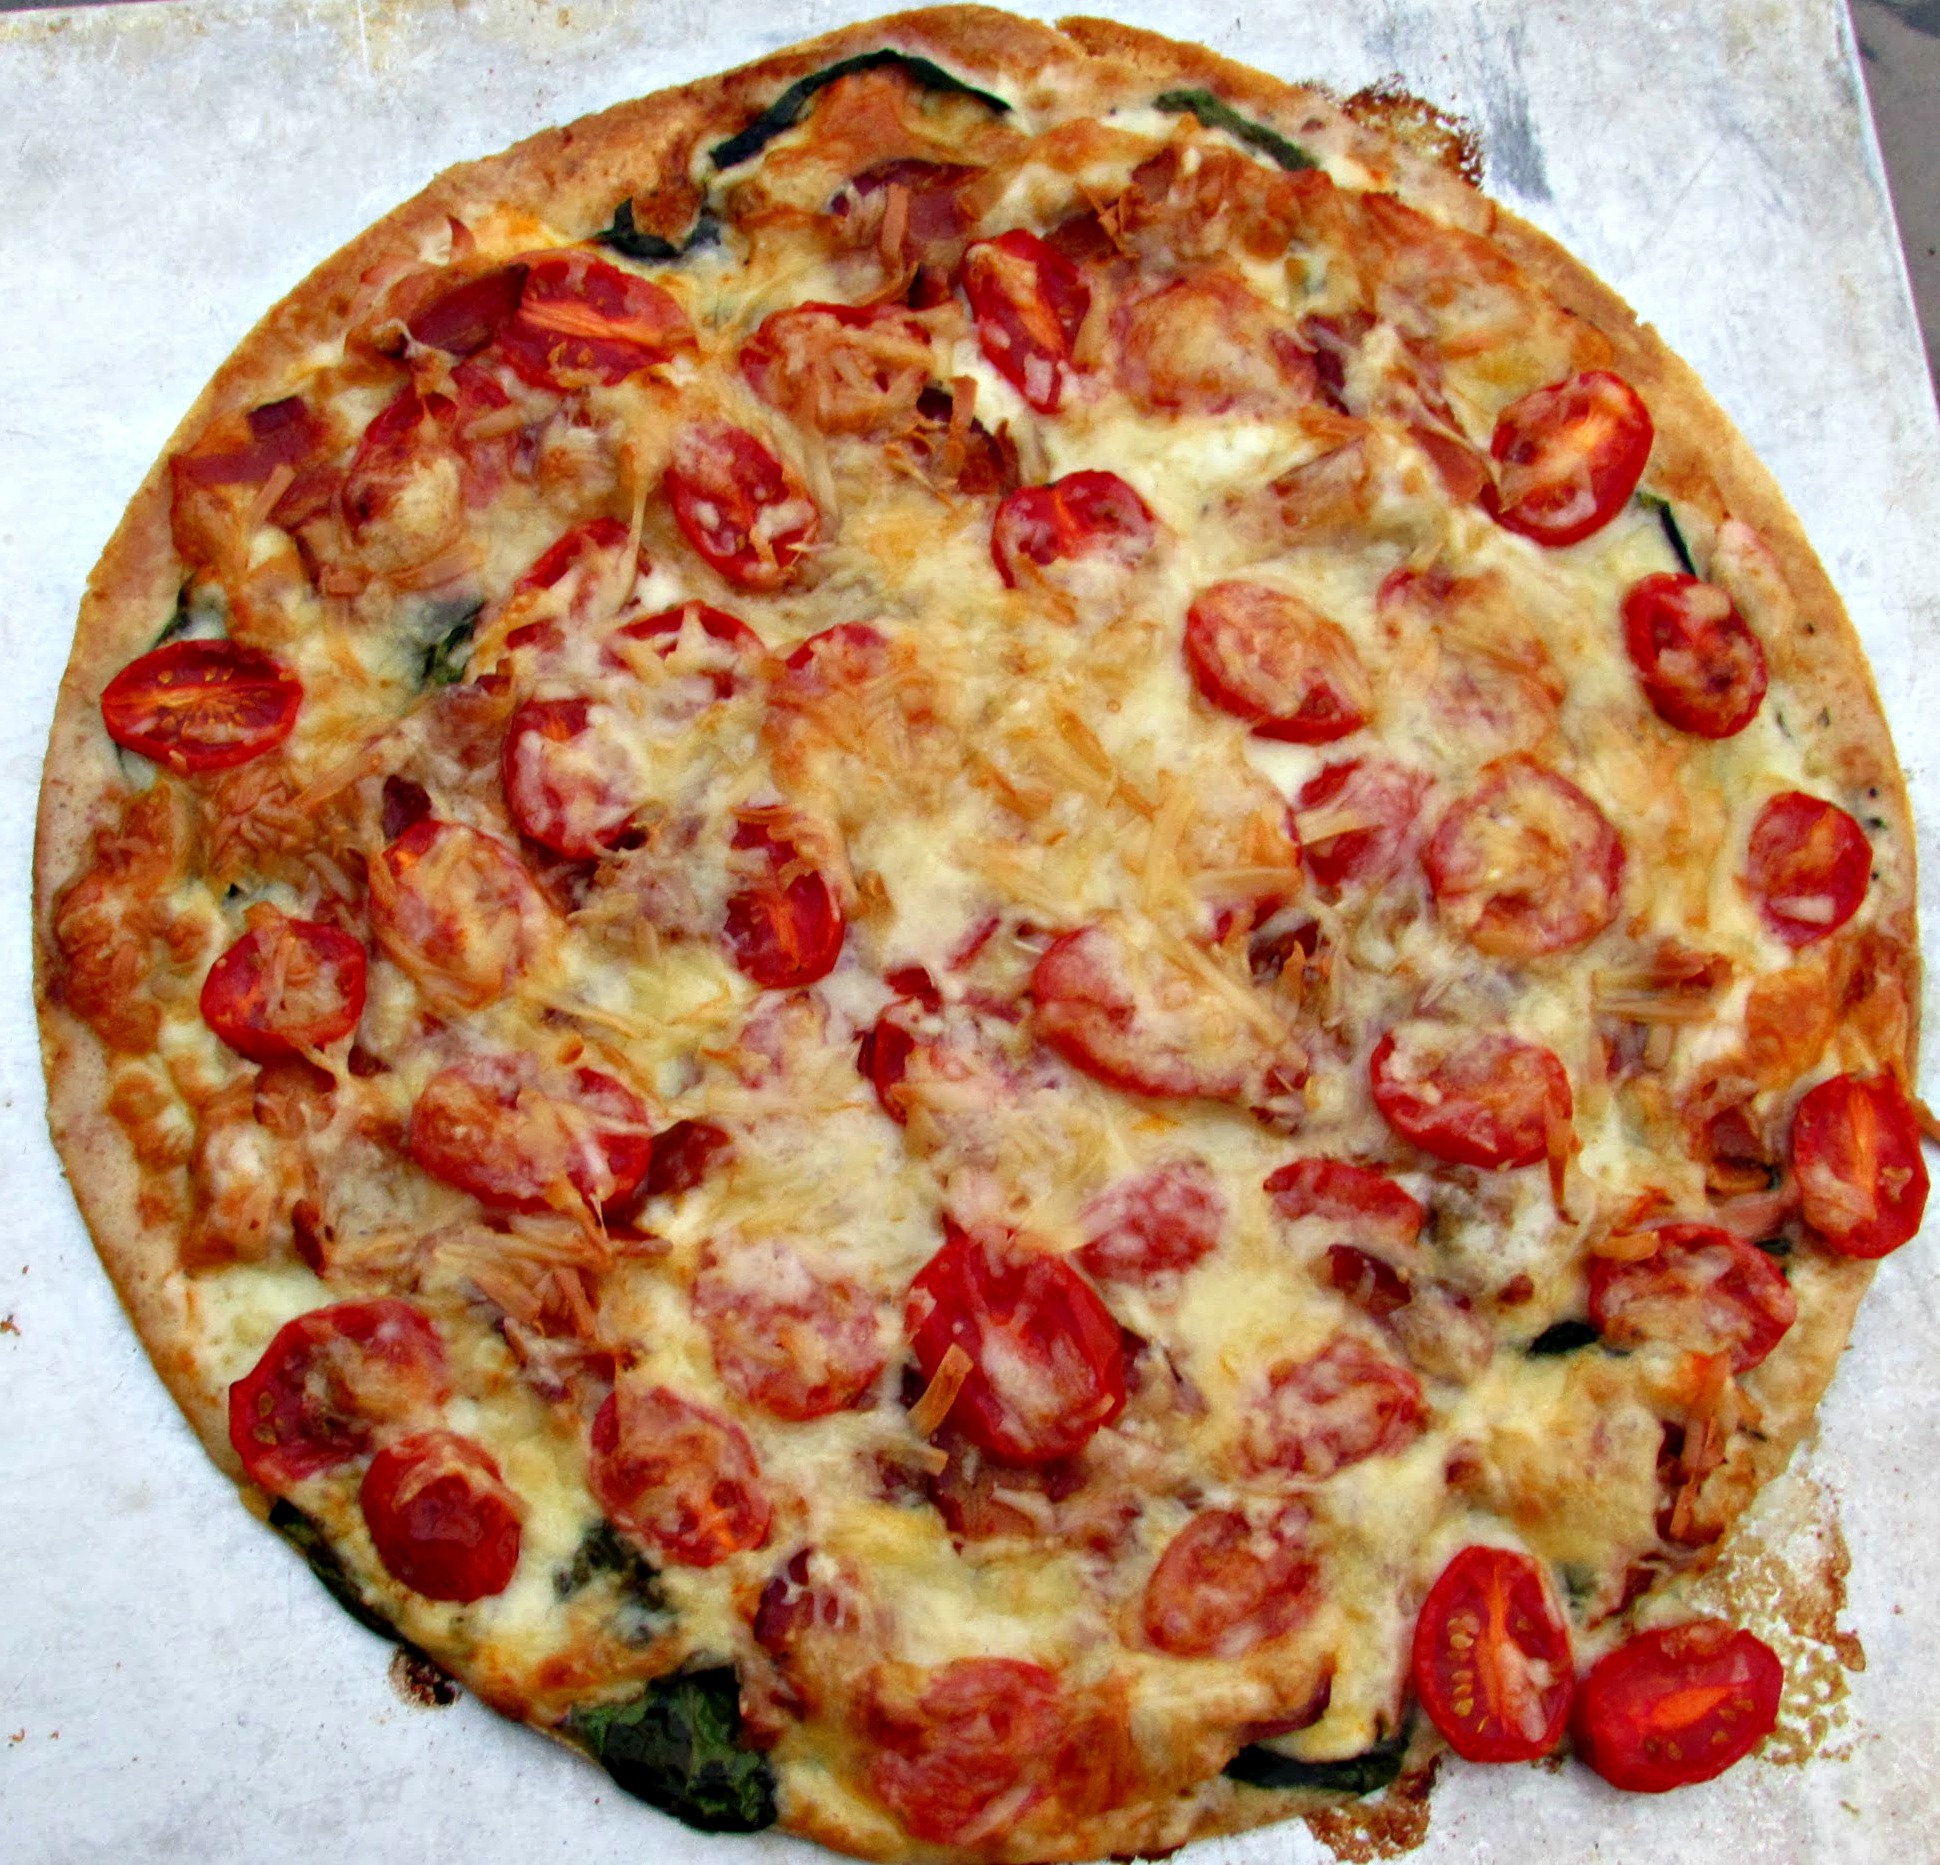 Fresh tomatoes on a pizza